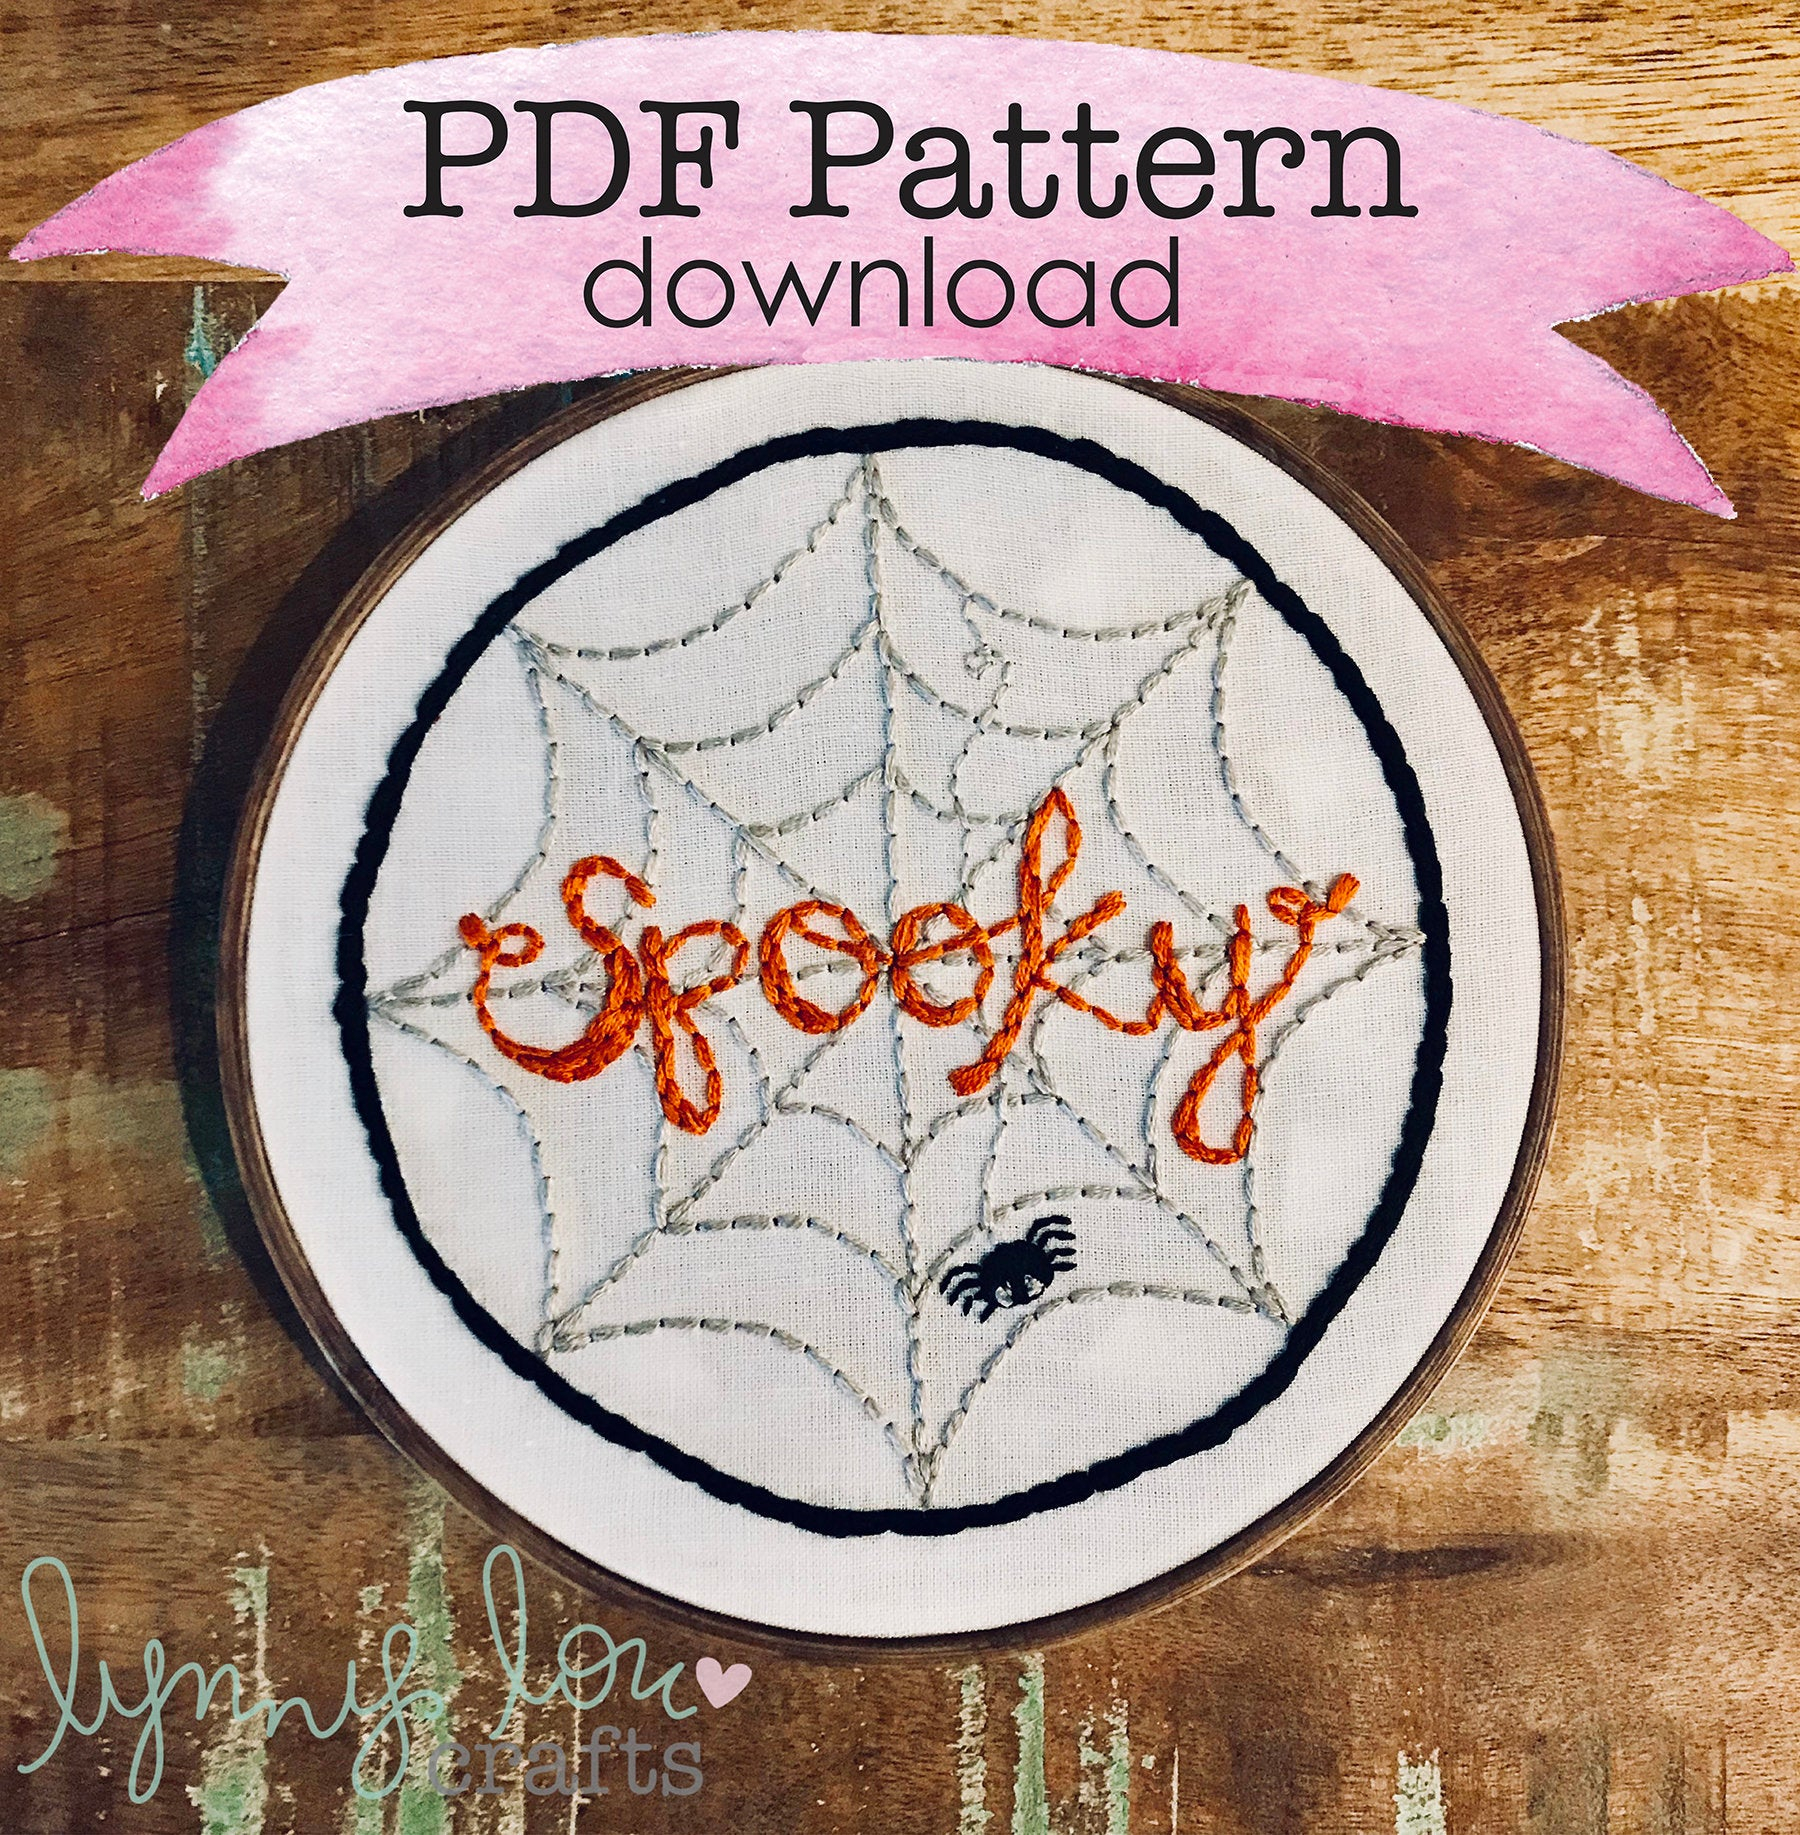 Halloween Hand Embroidery Patterns Downloadable Pdf Embroidery Pattern Spooky Halloween Embroidery Design Hoop Art Hand Embroidery Modern Embroidery Adult Craft